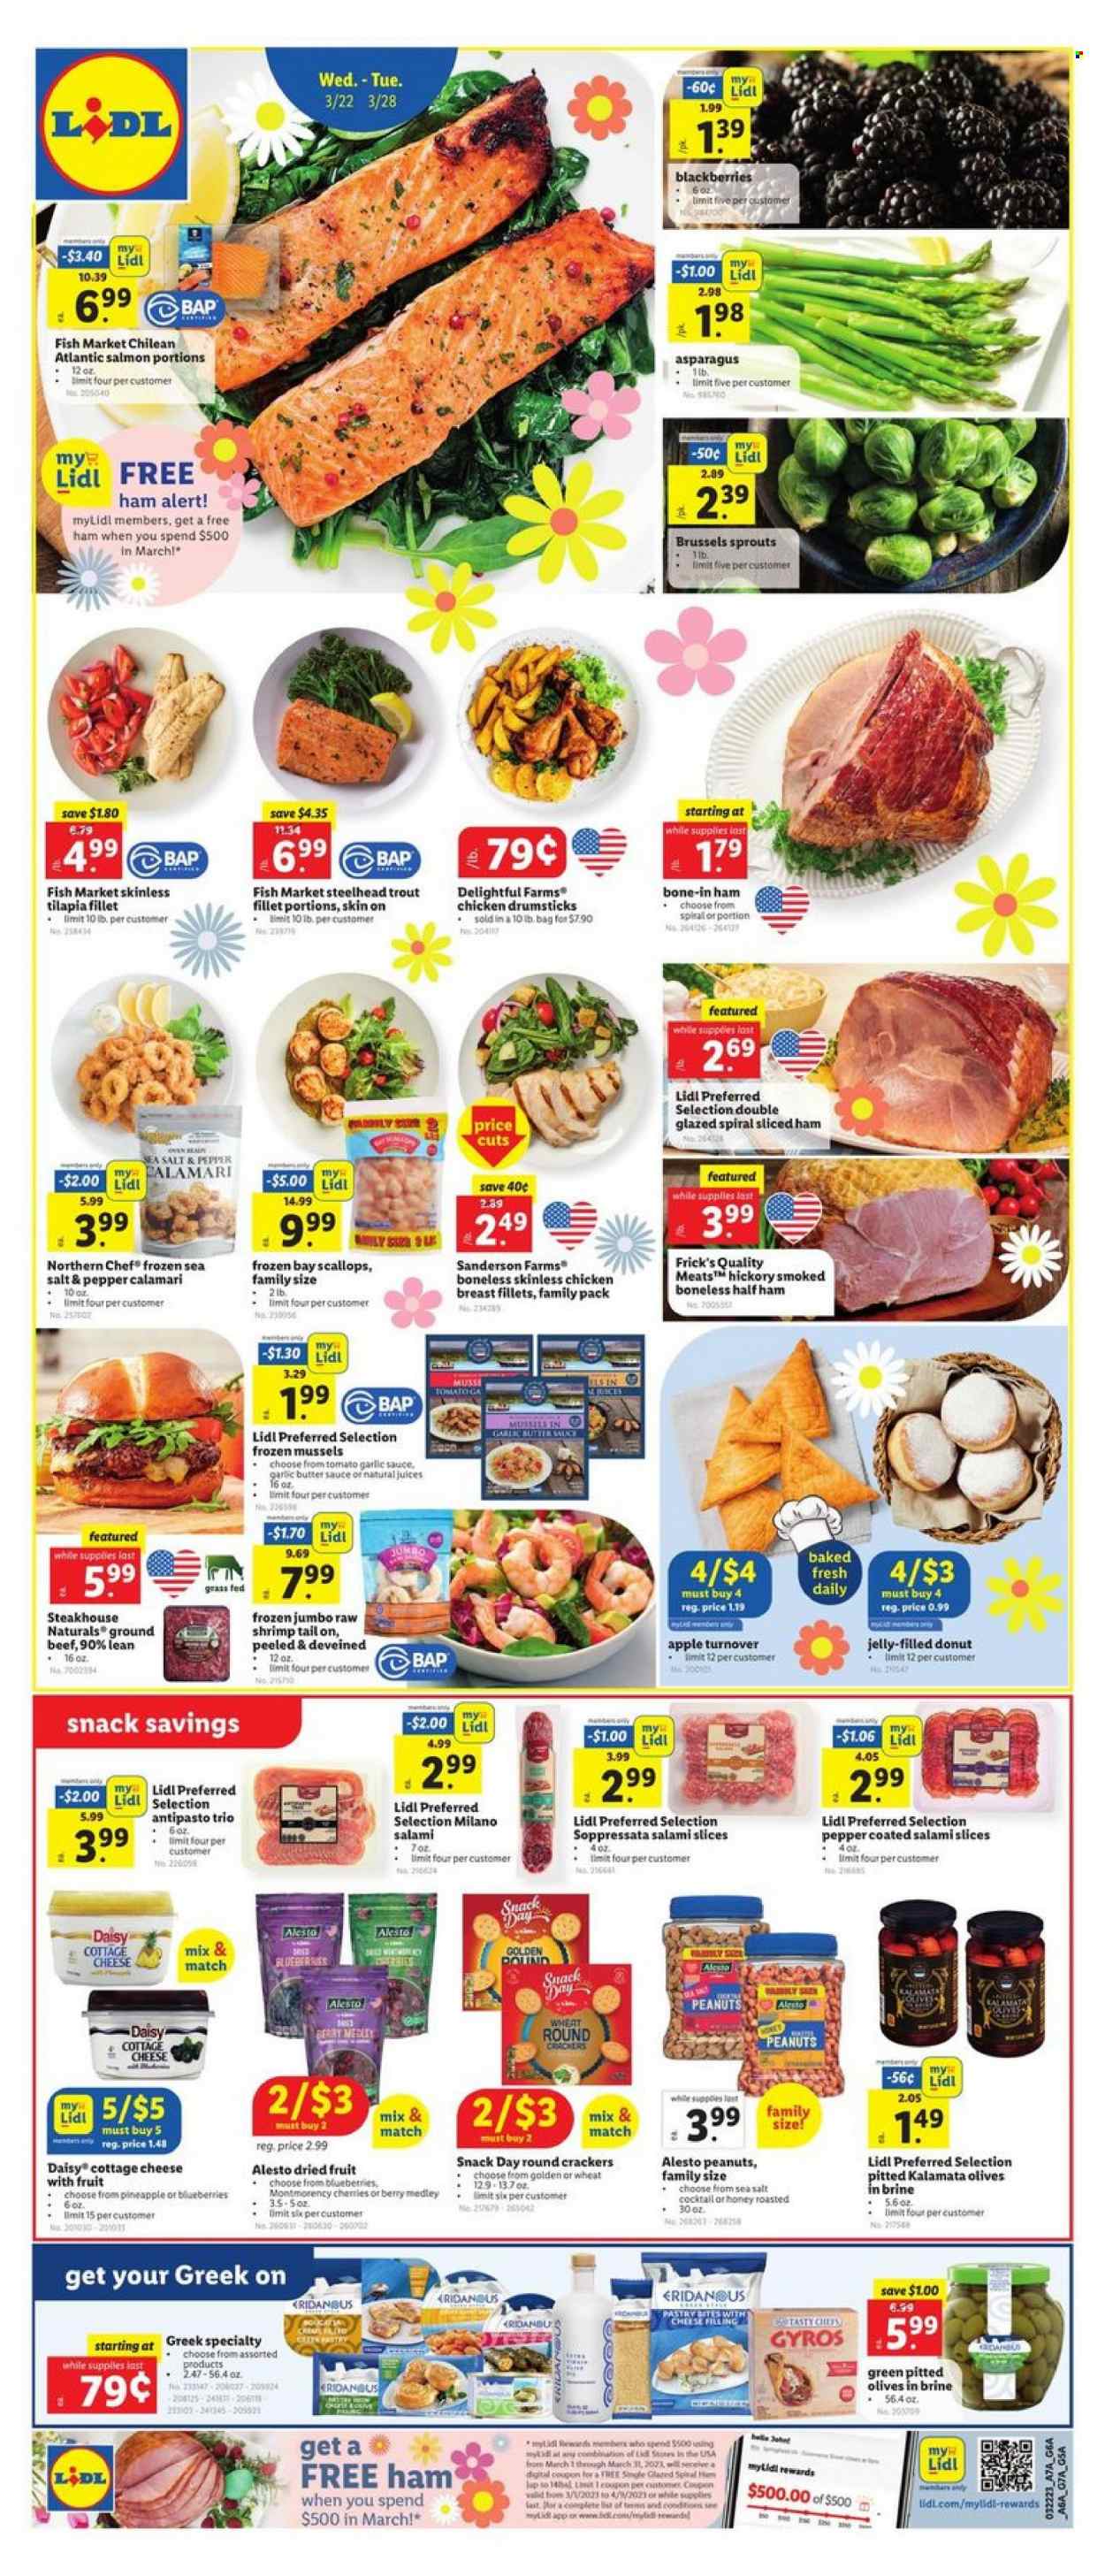 thumbnail - Lidl Flyer - 03/22/2023 - 03/28/2023 - Sales products - donut, asparagus, brussel sprouts, blackberries, blueberries, calamari, mussels, salmon, scallops, tilapia, trout, shrimps, salami, soppressata, half ham, spiral ham, cottage cheese, cheese, snack, jelly, crackers, olives, garlic sauce, peanuts, dried fruit, juice, chicken breasts, chicken drumsticks, beef meat, ground beef, bag, lid. Page 1.